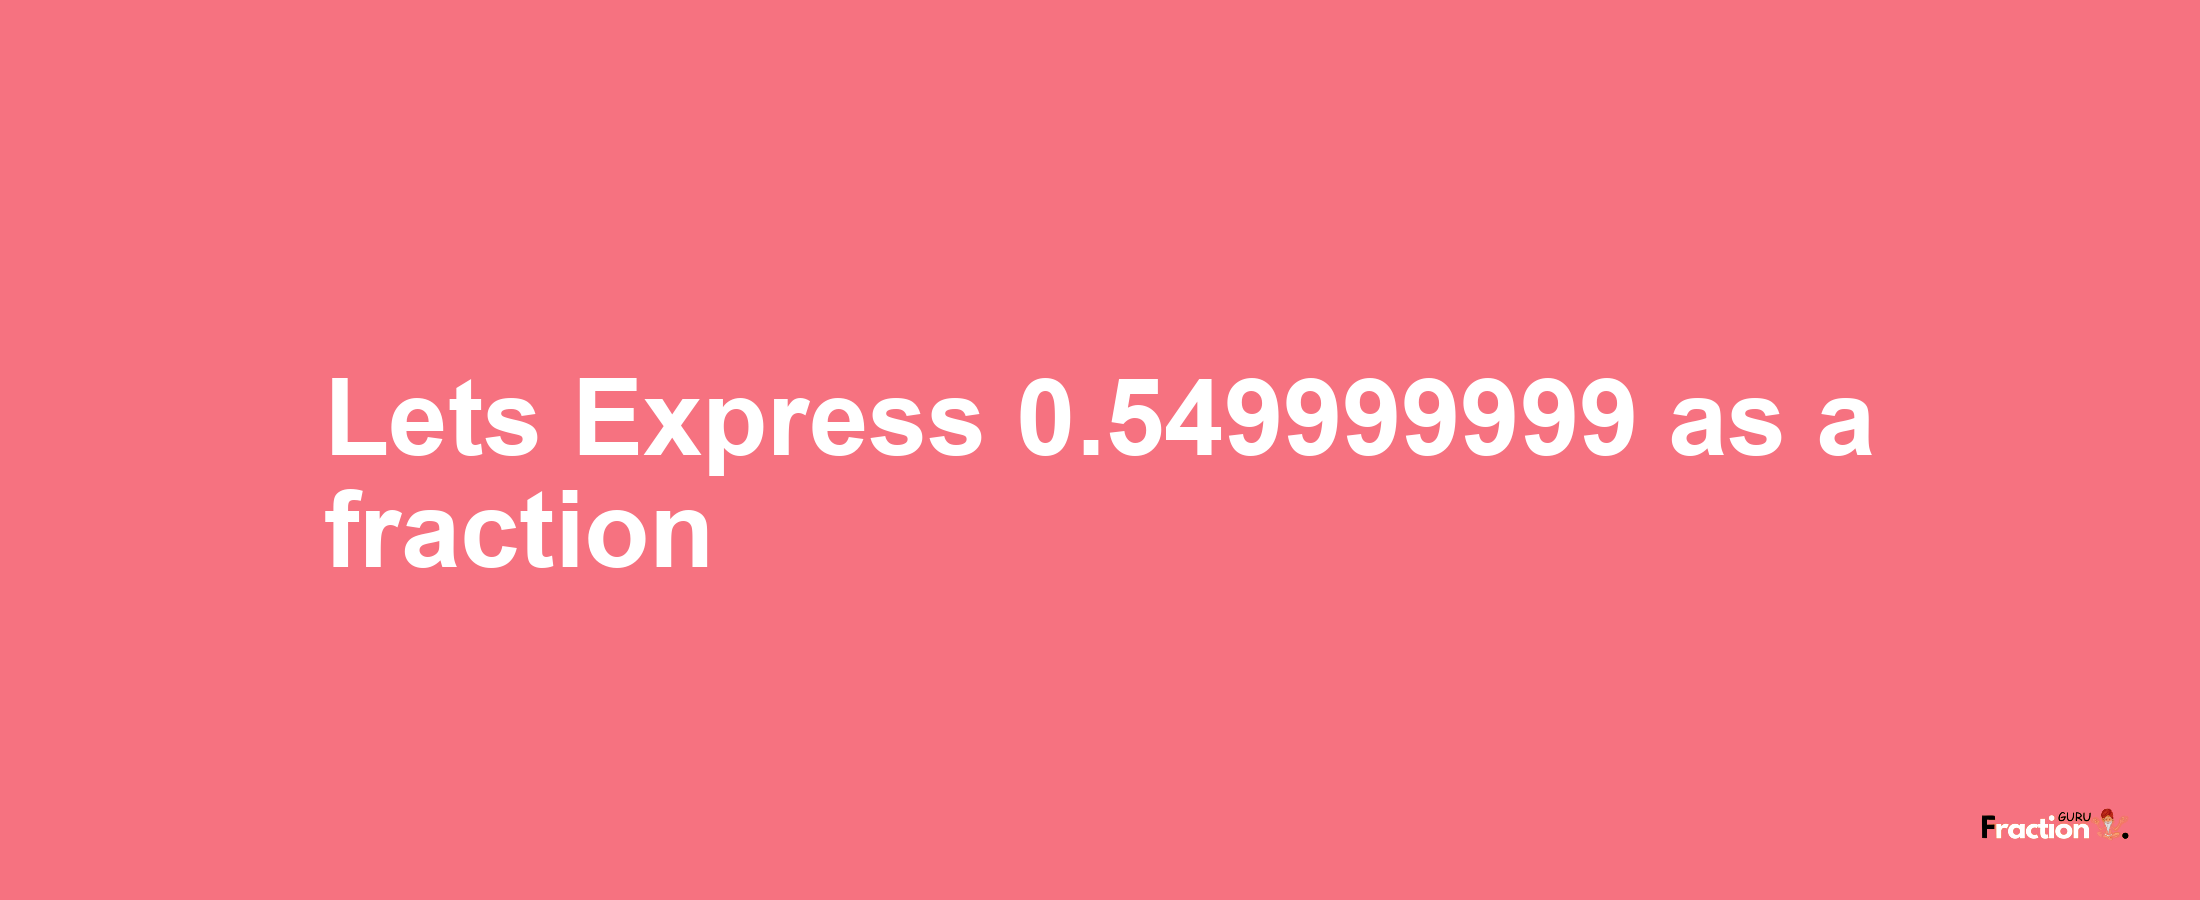 Lets Express 0.549999999 as afraction